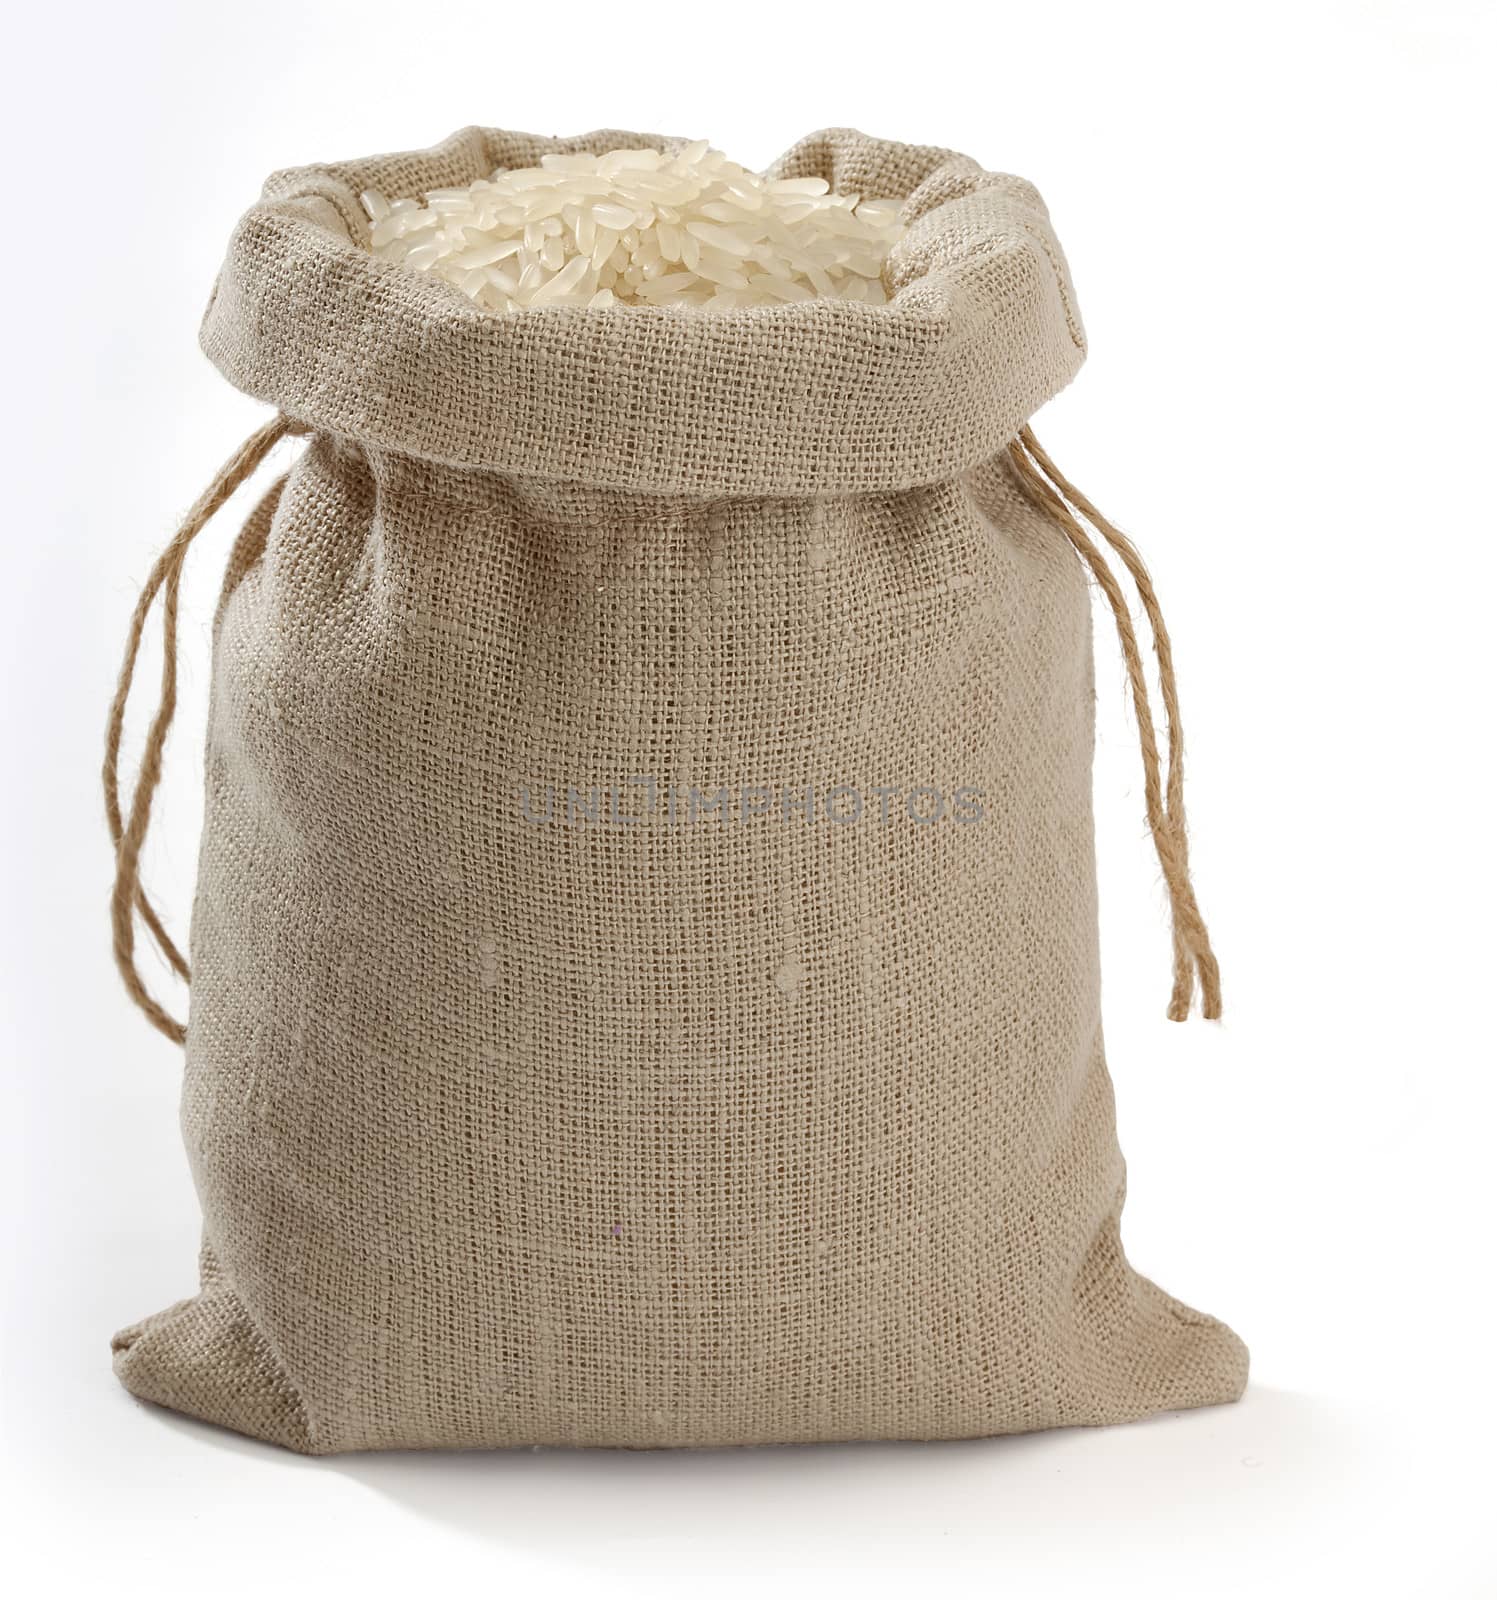 Sack with rice on the white background